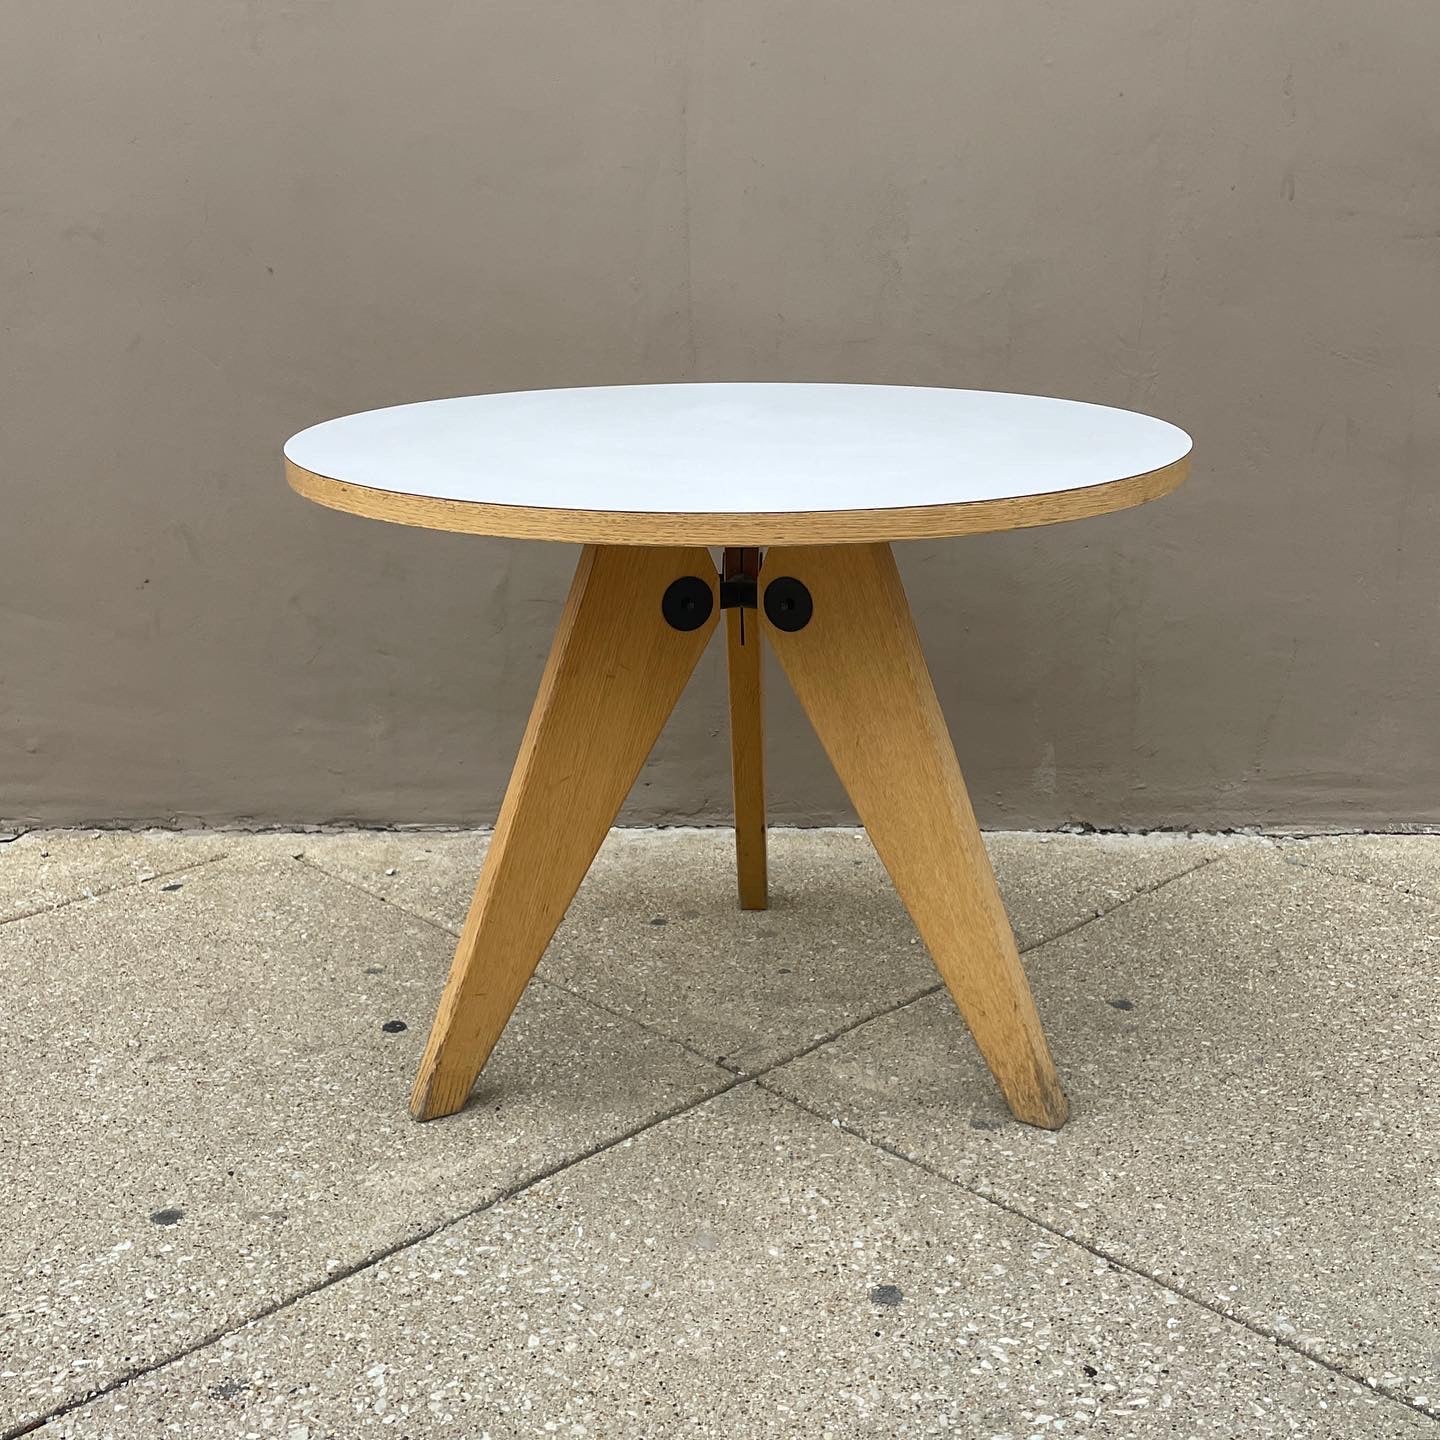 Gueridon Table by Jean Prouvé for Vitra